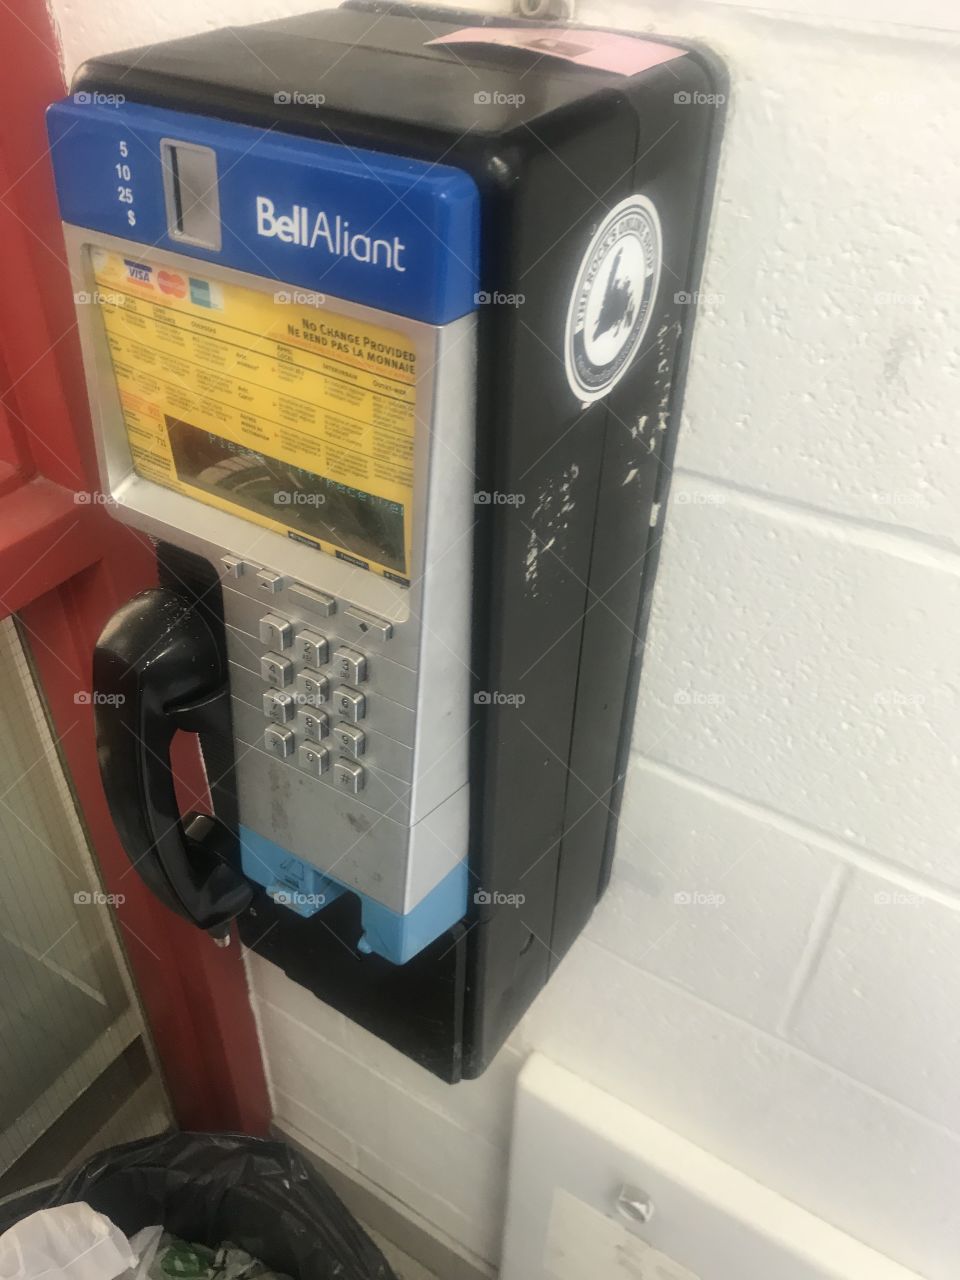 This is a bell Aliant payphone. They are becoming increasingly hard to find. I realize a day is coming when people will no longer remember what a payphone is, and maybe this will help preserve memory of a fading technology that is in decline 